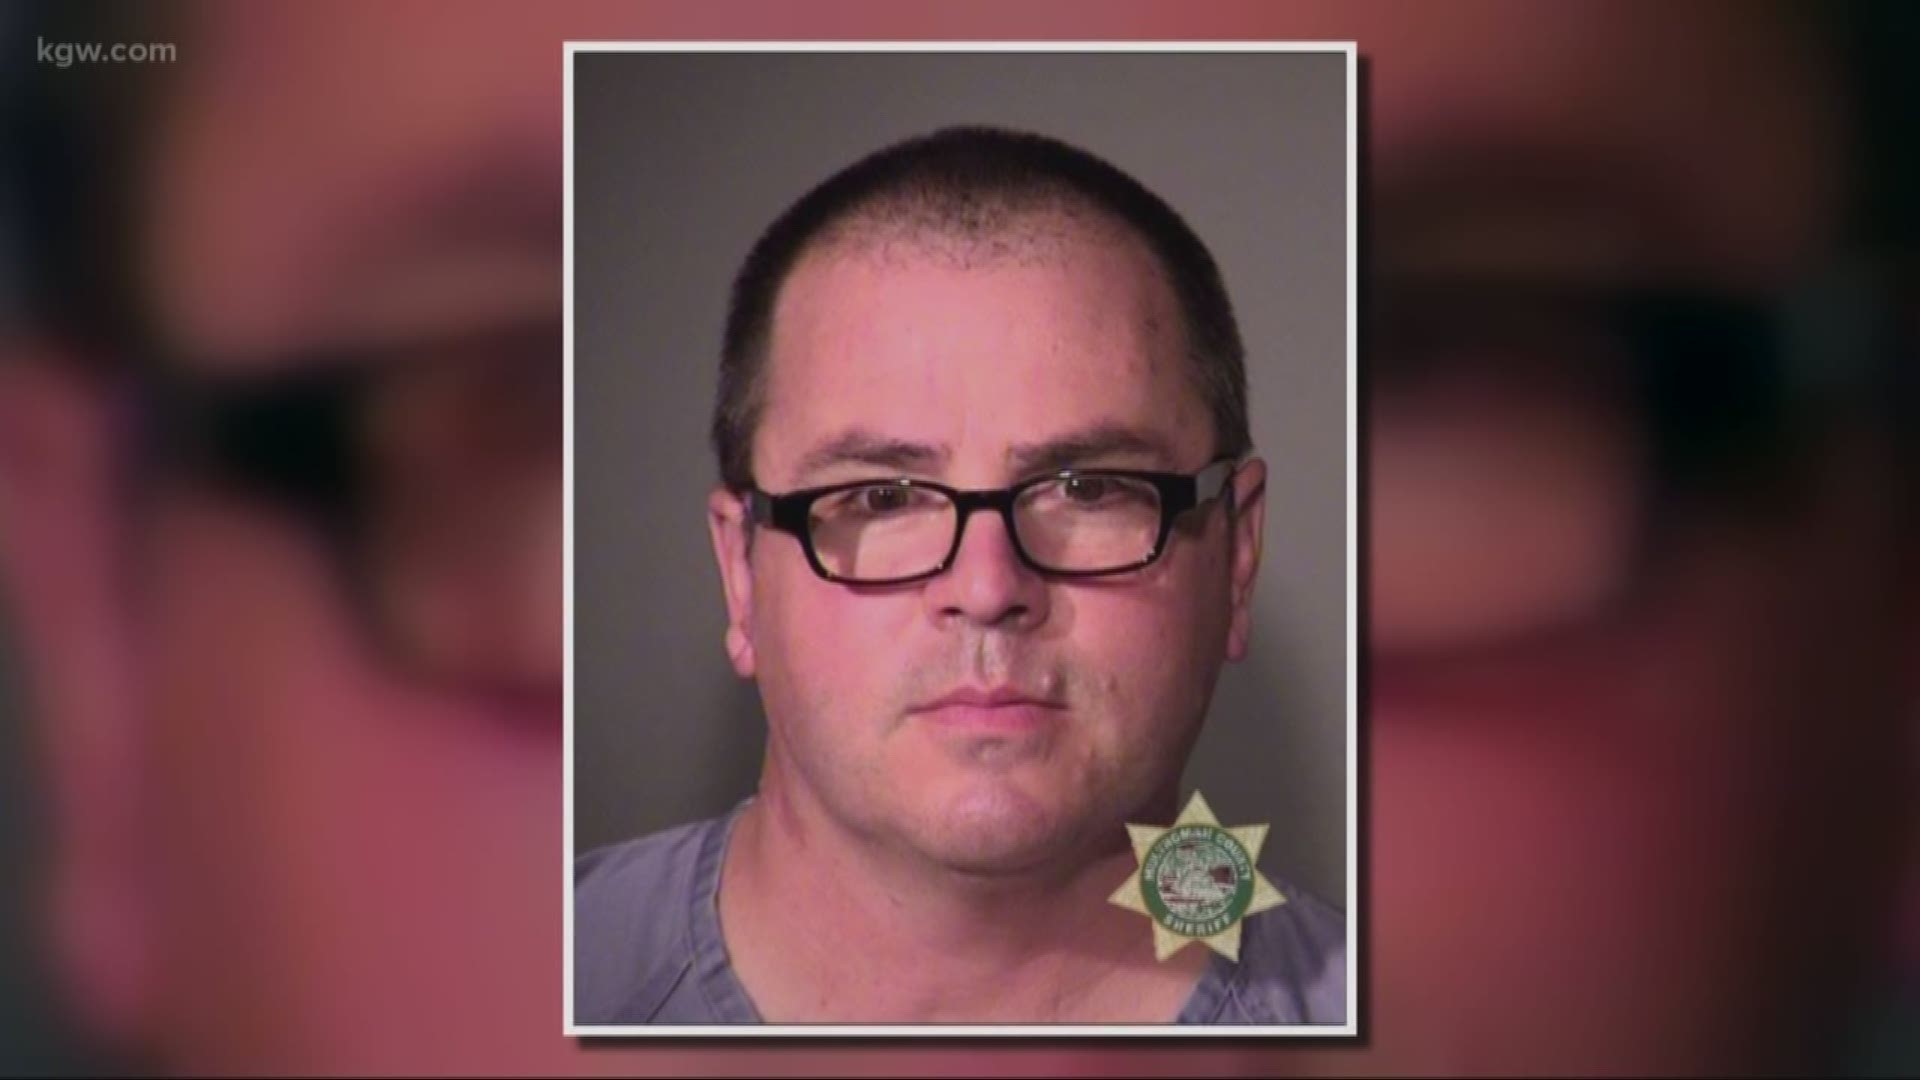 A man attacked his former University of Portland colleague with a baseball bat, according to police.